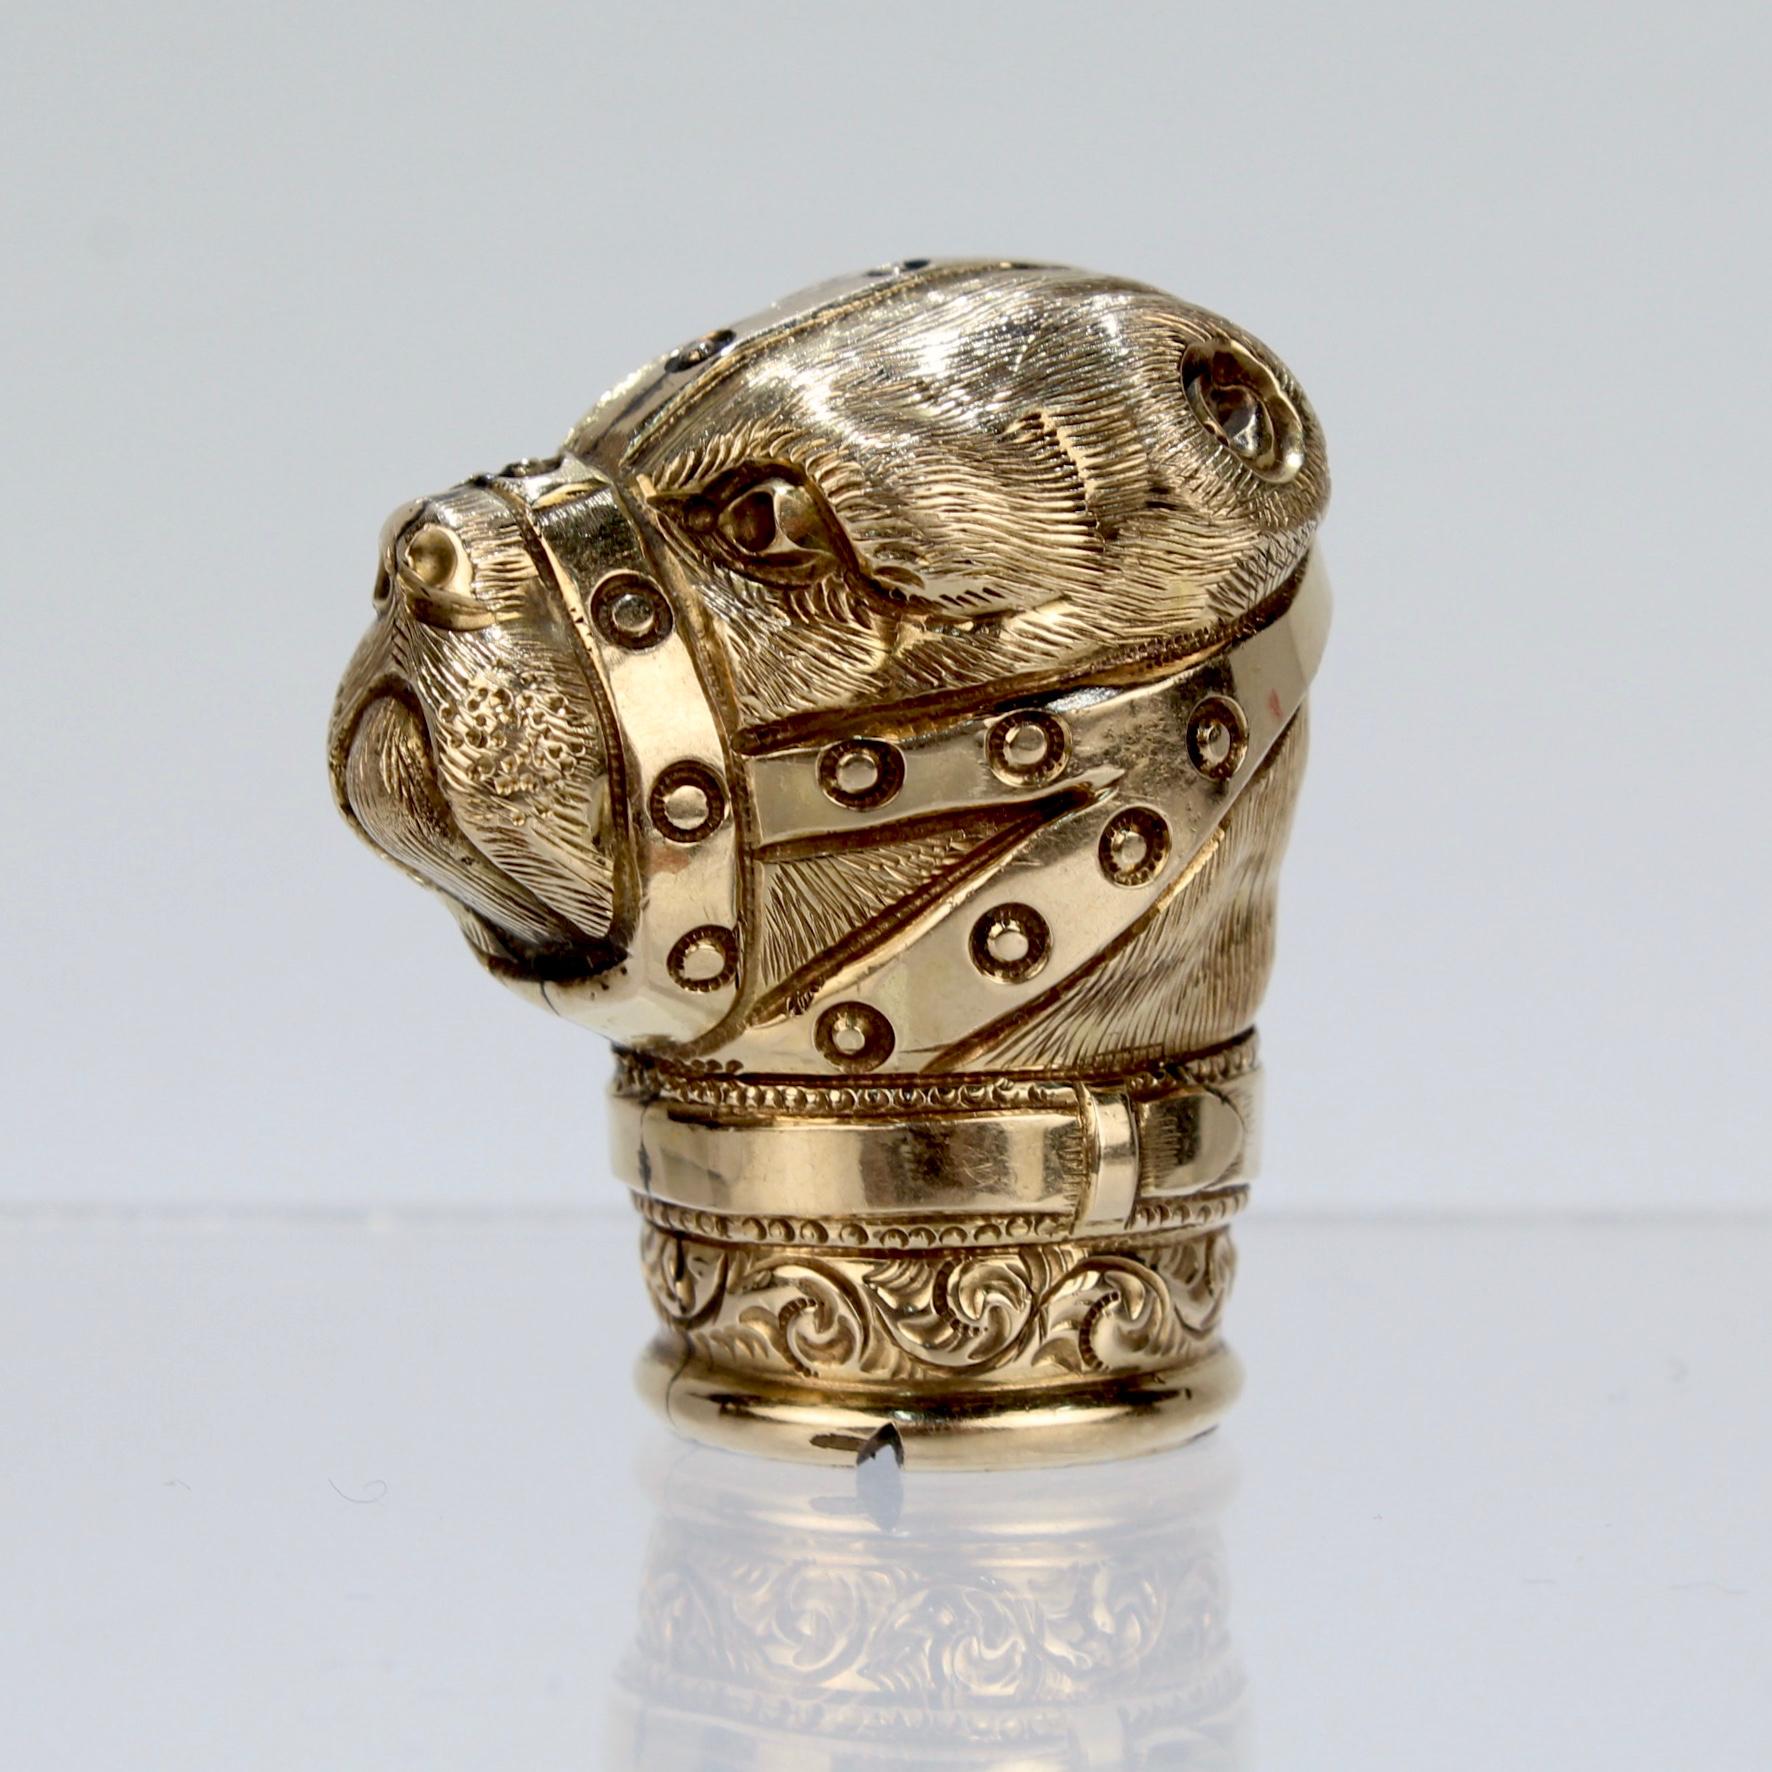 A wonderful, figural antique Victorian gold-filled cane top or walking stick handle.

In the form of a muzzled bear with cropped ears. 

Bear Baiting was a brutal blood sport akin to modern dog fighting that pitted a bear (often tethered and